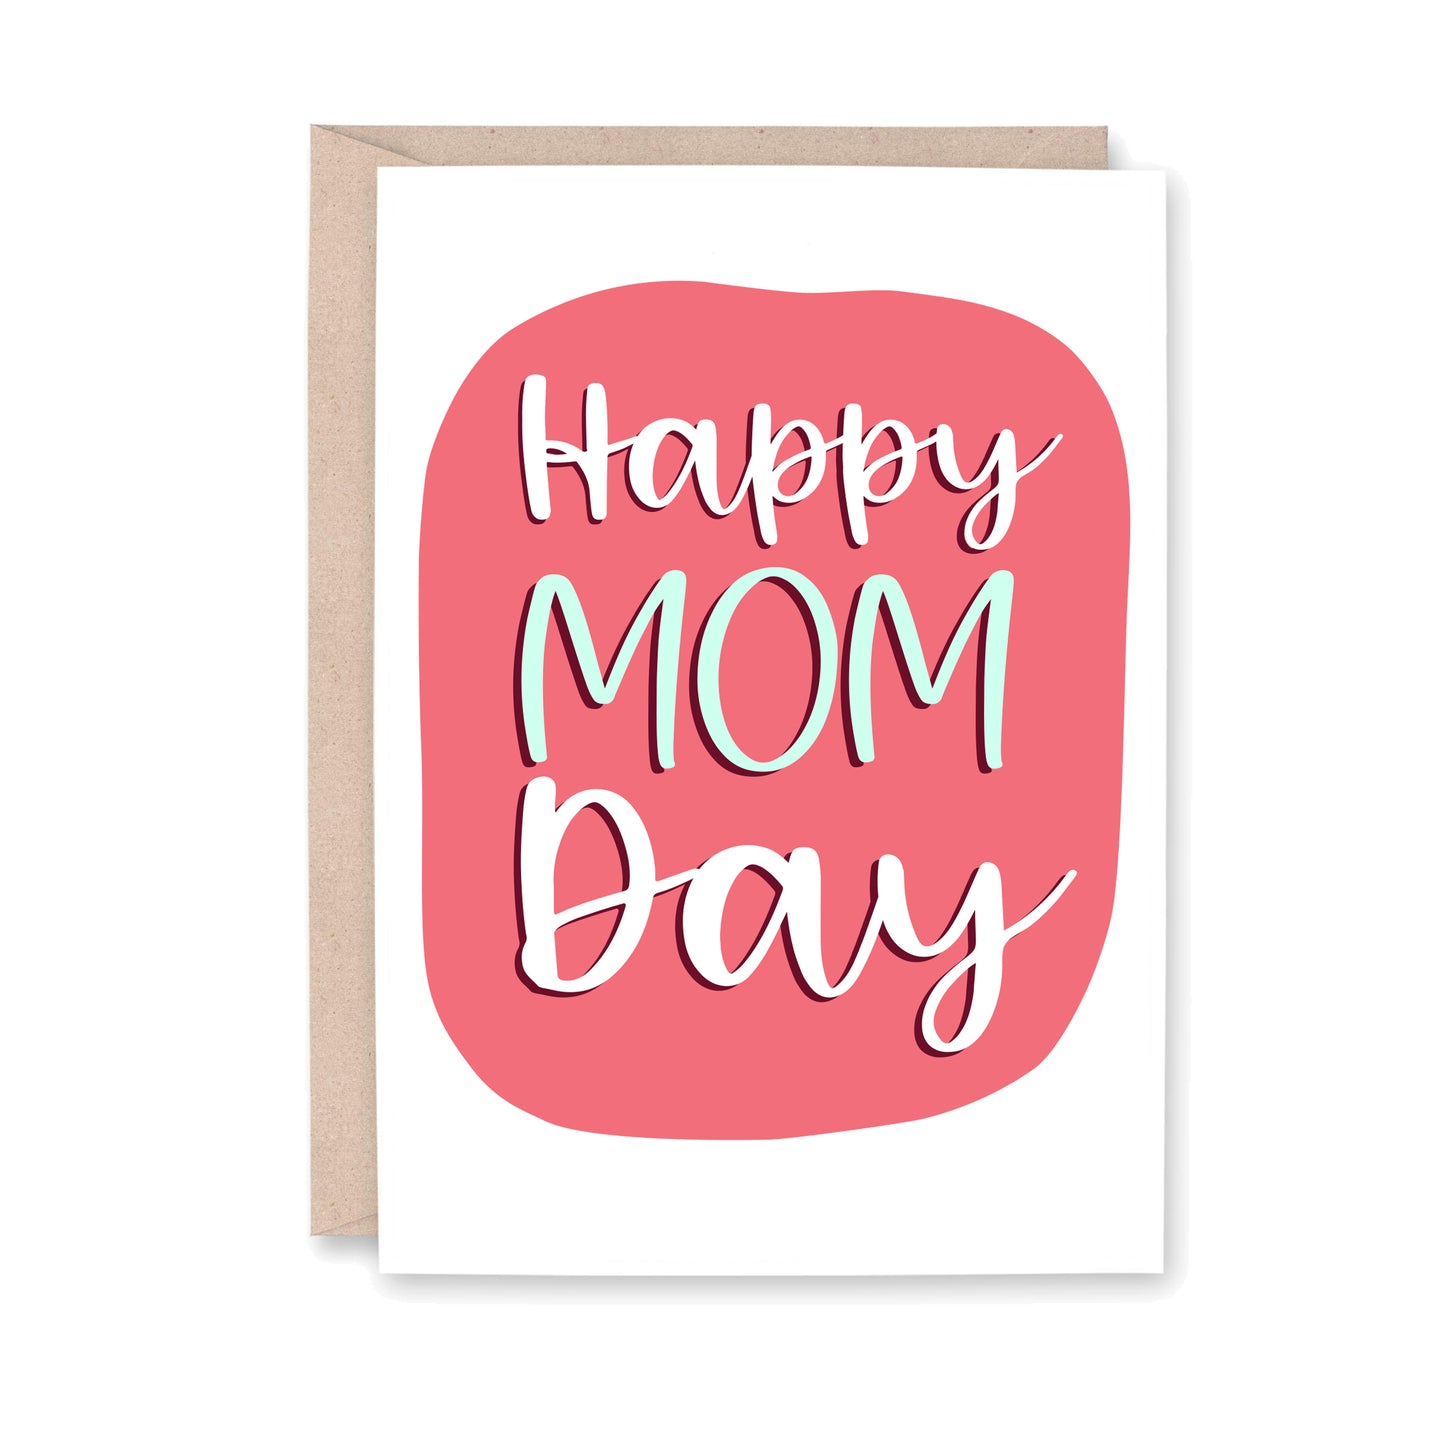 Greeting card that reads "Happy MOM Day"